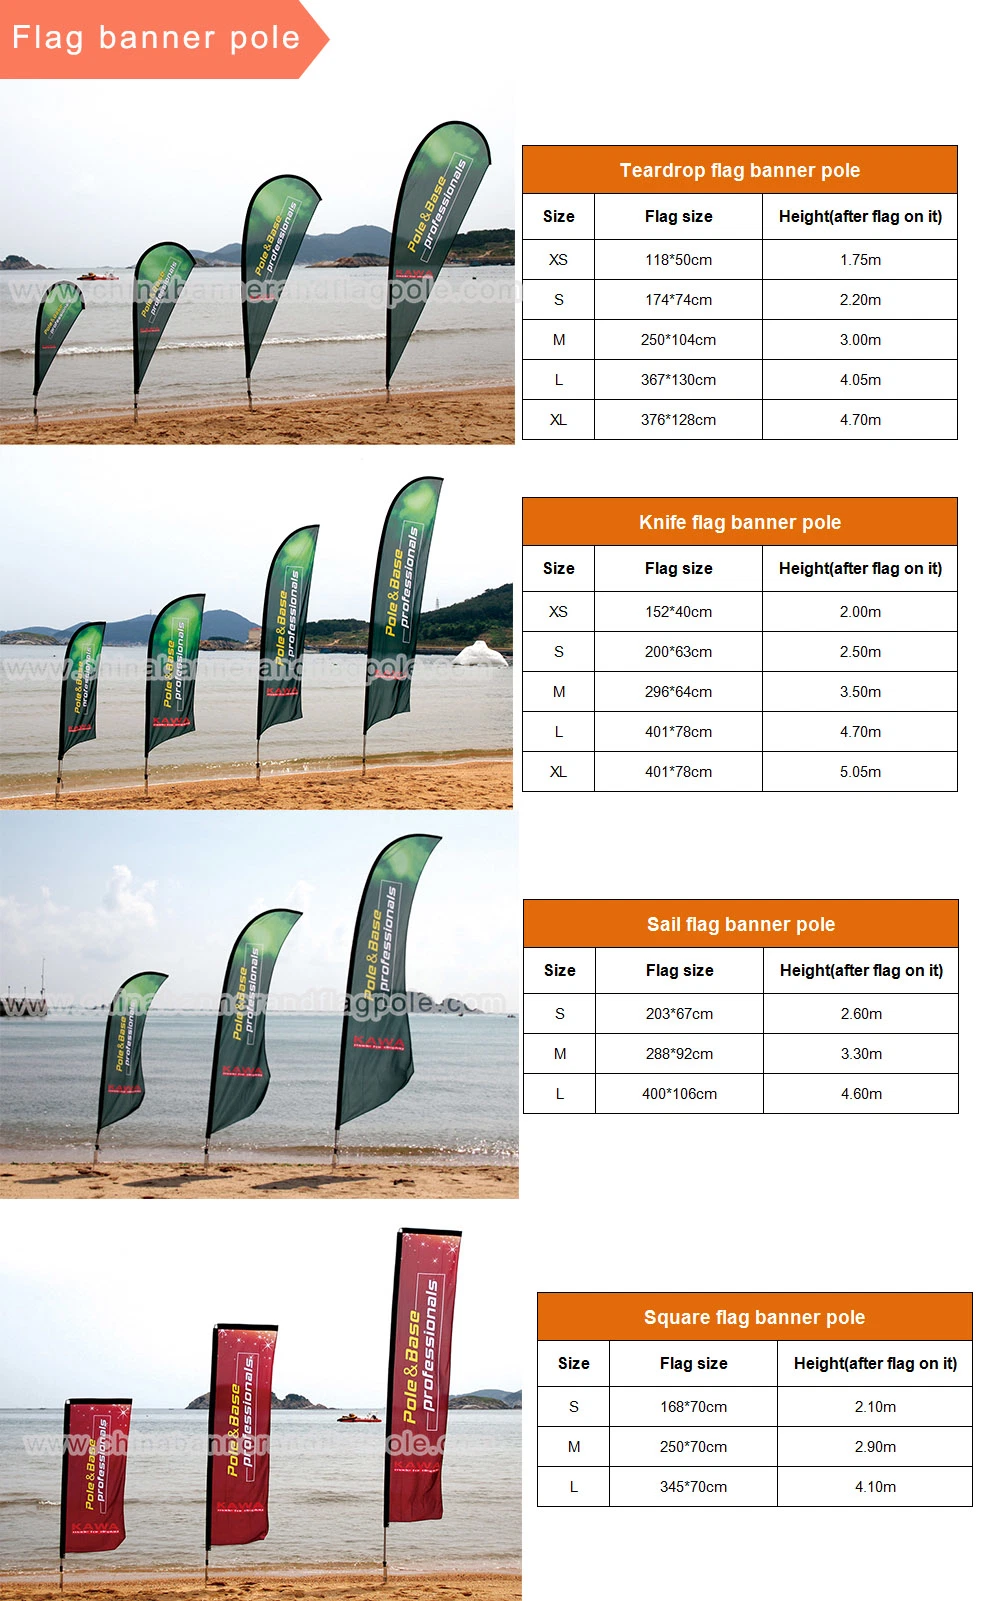 10FT Full Color Custom 13feet Teardrop Flex Banner Outdoor Beach Wind Outdoor Advertising Fiberglass Flag with Metal Cross Base or Ground Spike with Best Price